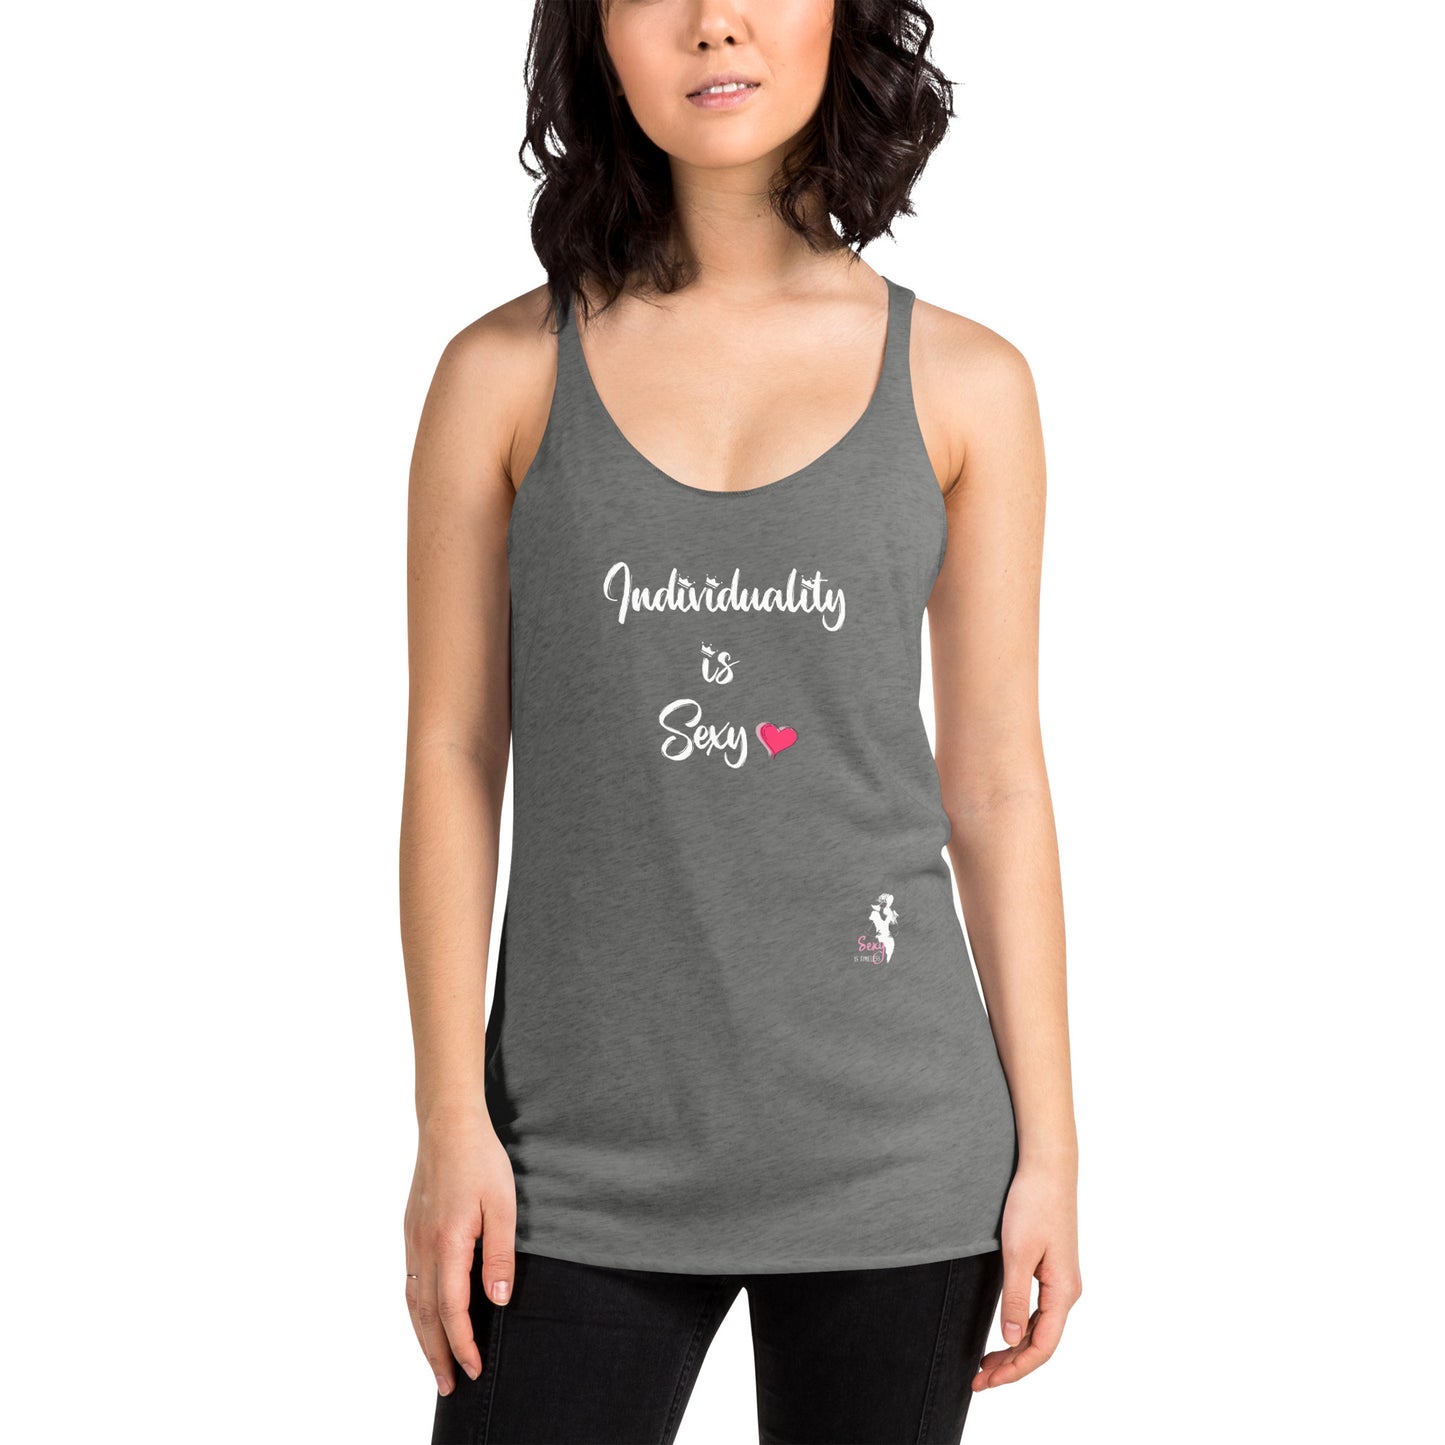 Women's Racerback Tank - Individuality is sexy - colors